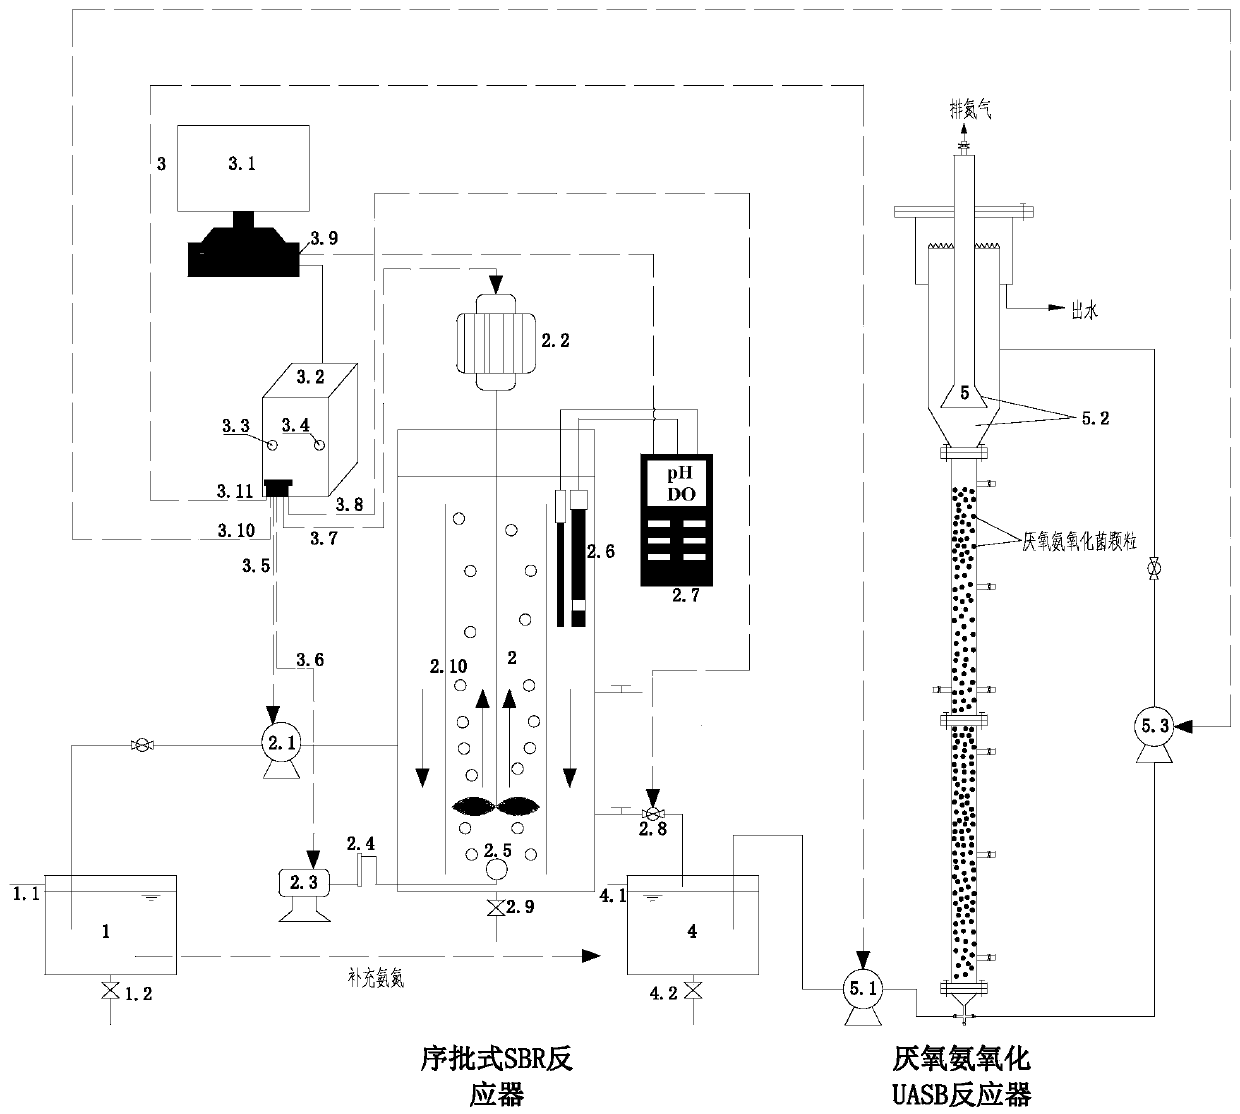 Device and method for treating low-carbon municipal sewage by anaerobic and aerobic alternation realized synchronous short-cut nitrification and denitrification combined with anaerobic ammonium oxidation